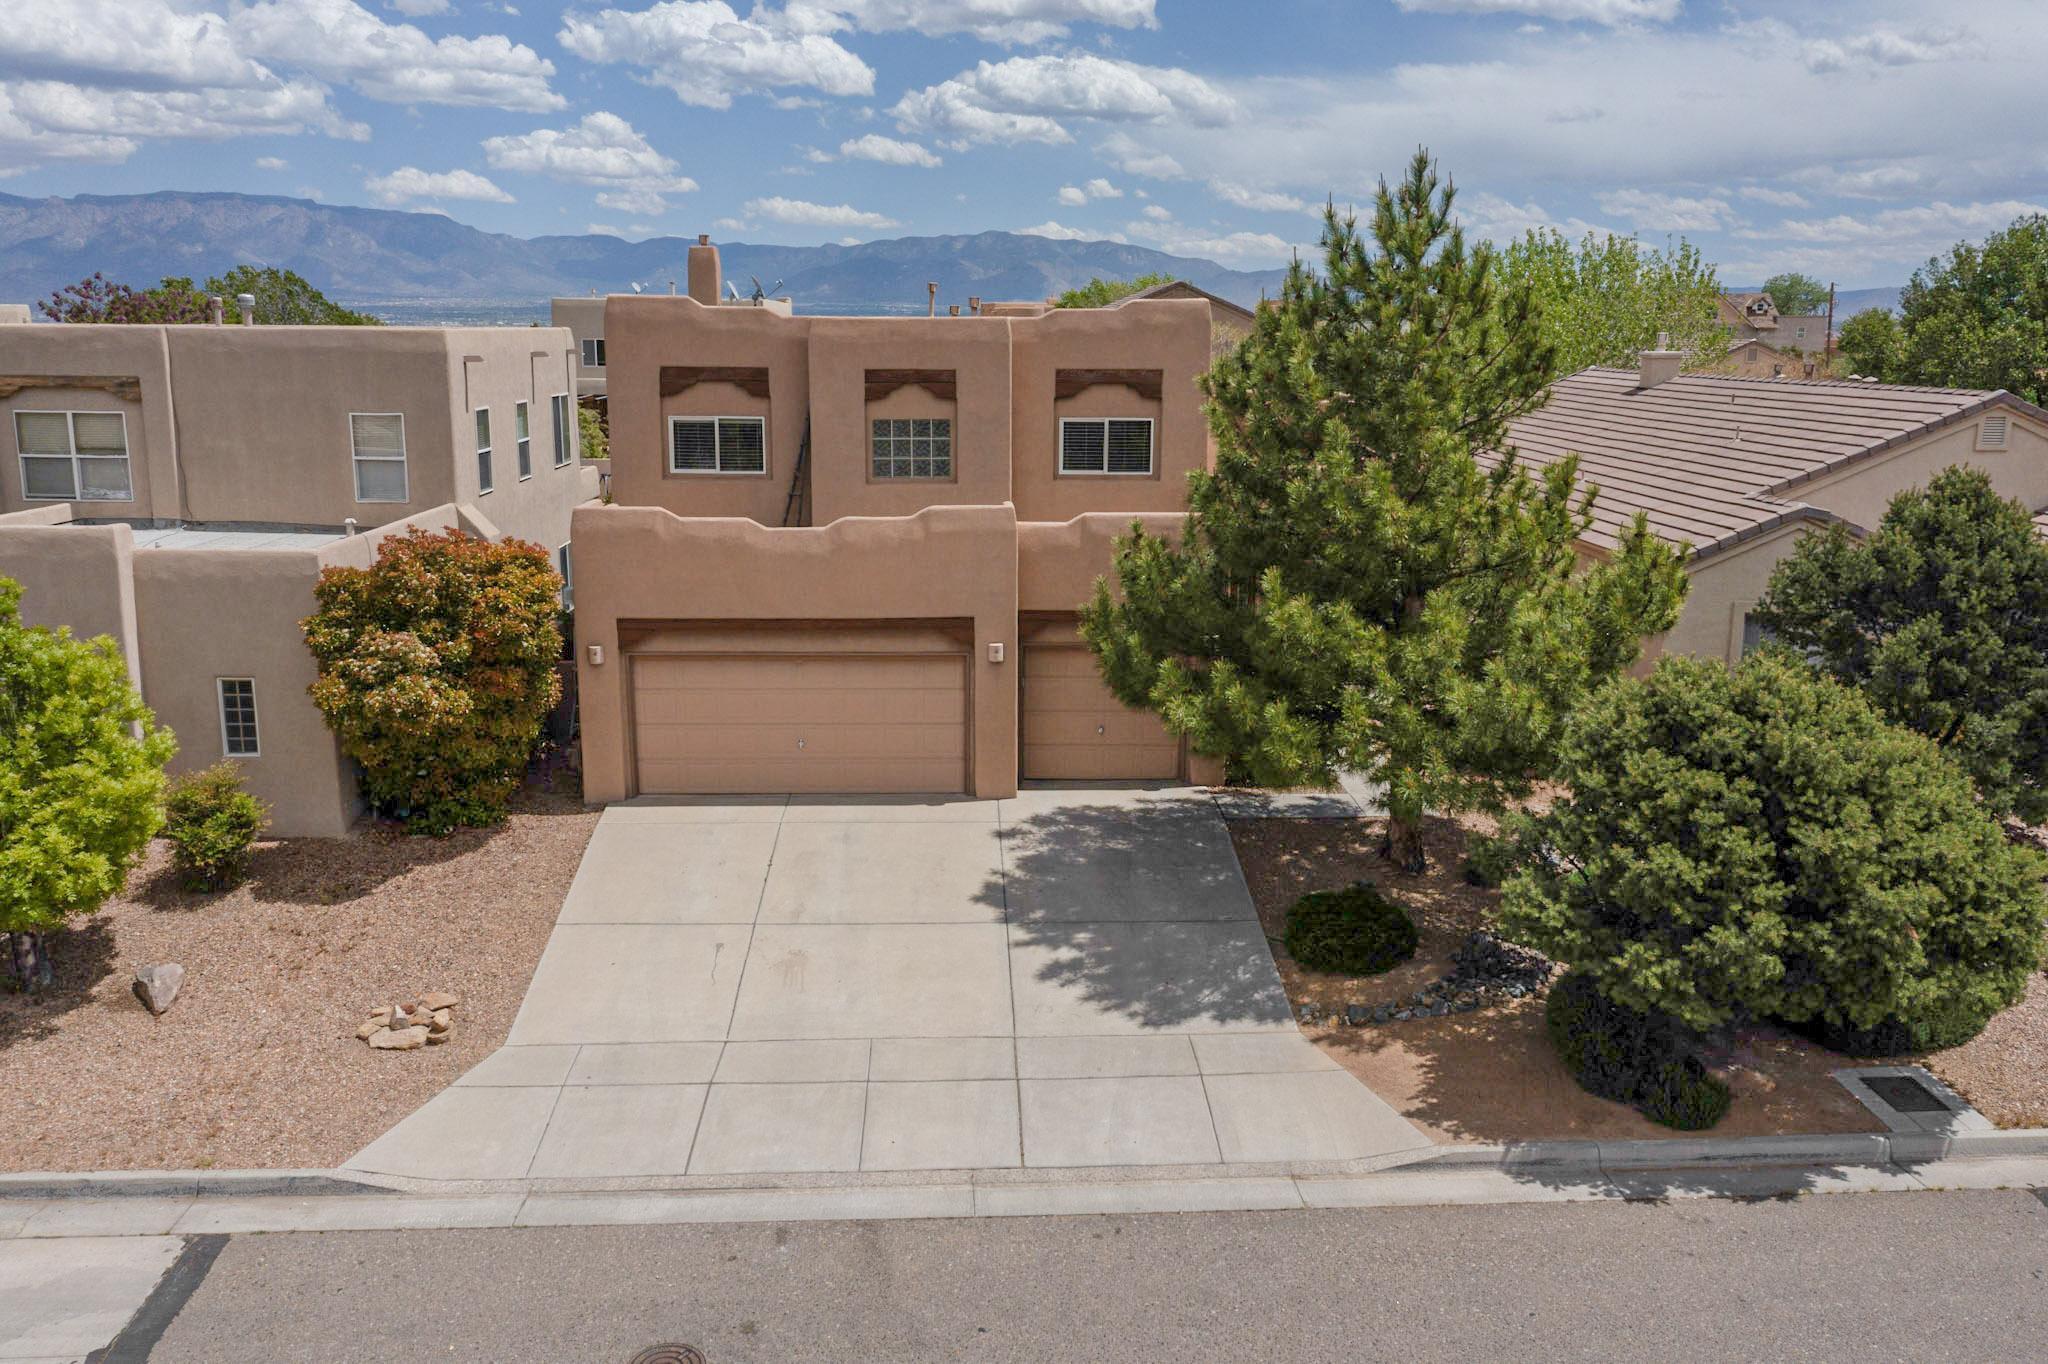 3816 Pinon Jay Court NW, Albuquerque, New Mexico 87120, 5 Bedrooms Bedrooms, ,3 BathroomsBathrooms,Residential,For Sale,3816 Pinon Jay Court NW,1061522